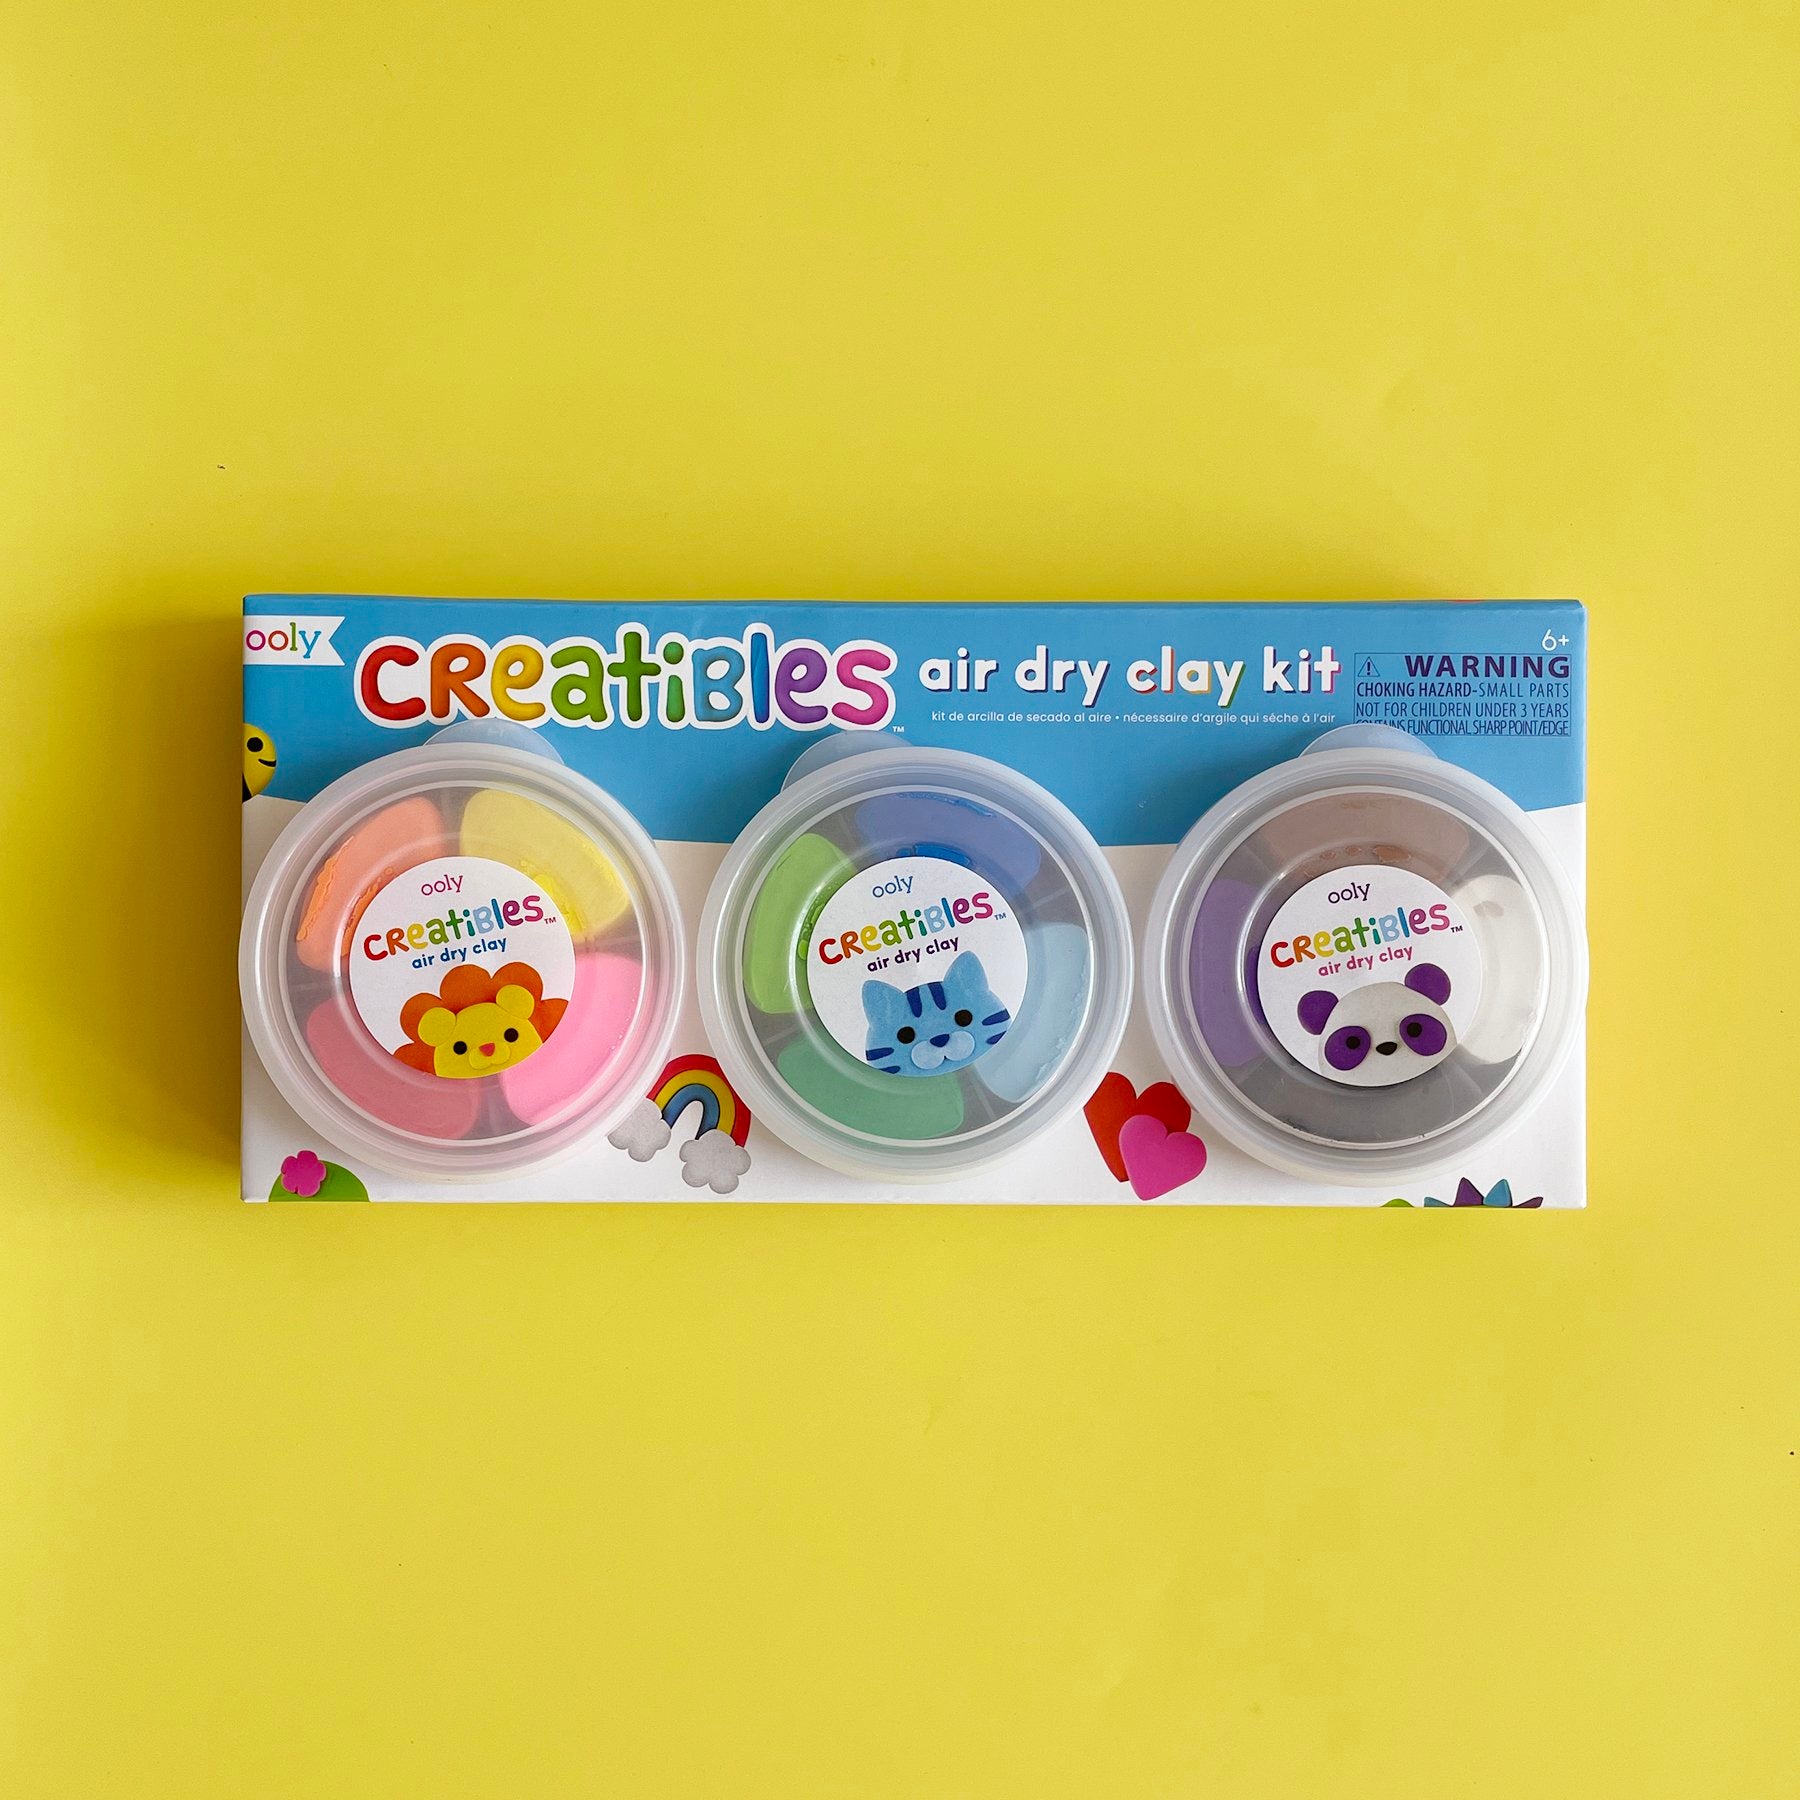 OOLY Creatibles D.I.Y. Air Dry Clay Kit - Set of 24 Colors